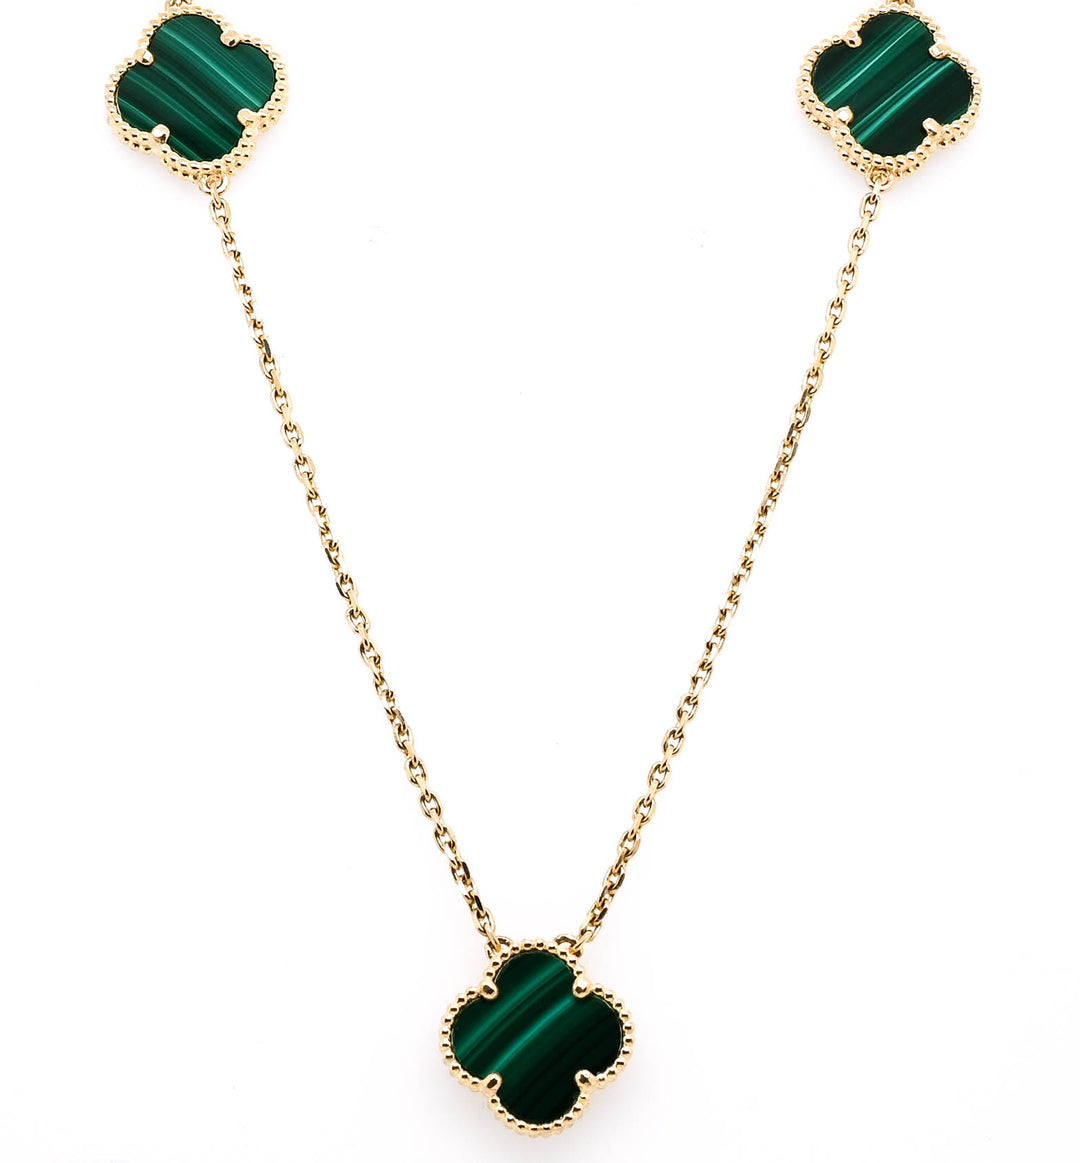 10KT Yellow Gold 18" Malachite Flower Necklace


Dimensions:12x12mm